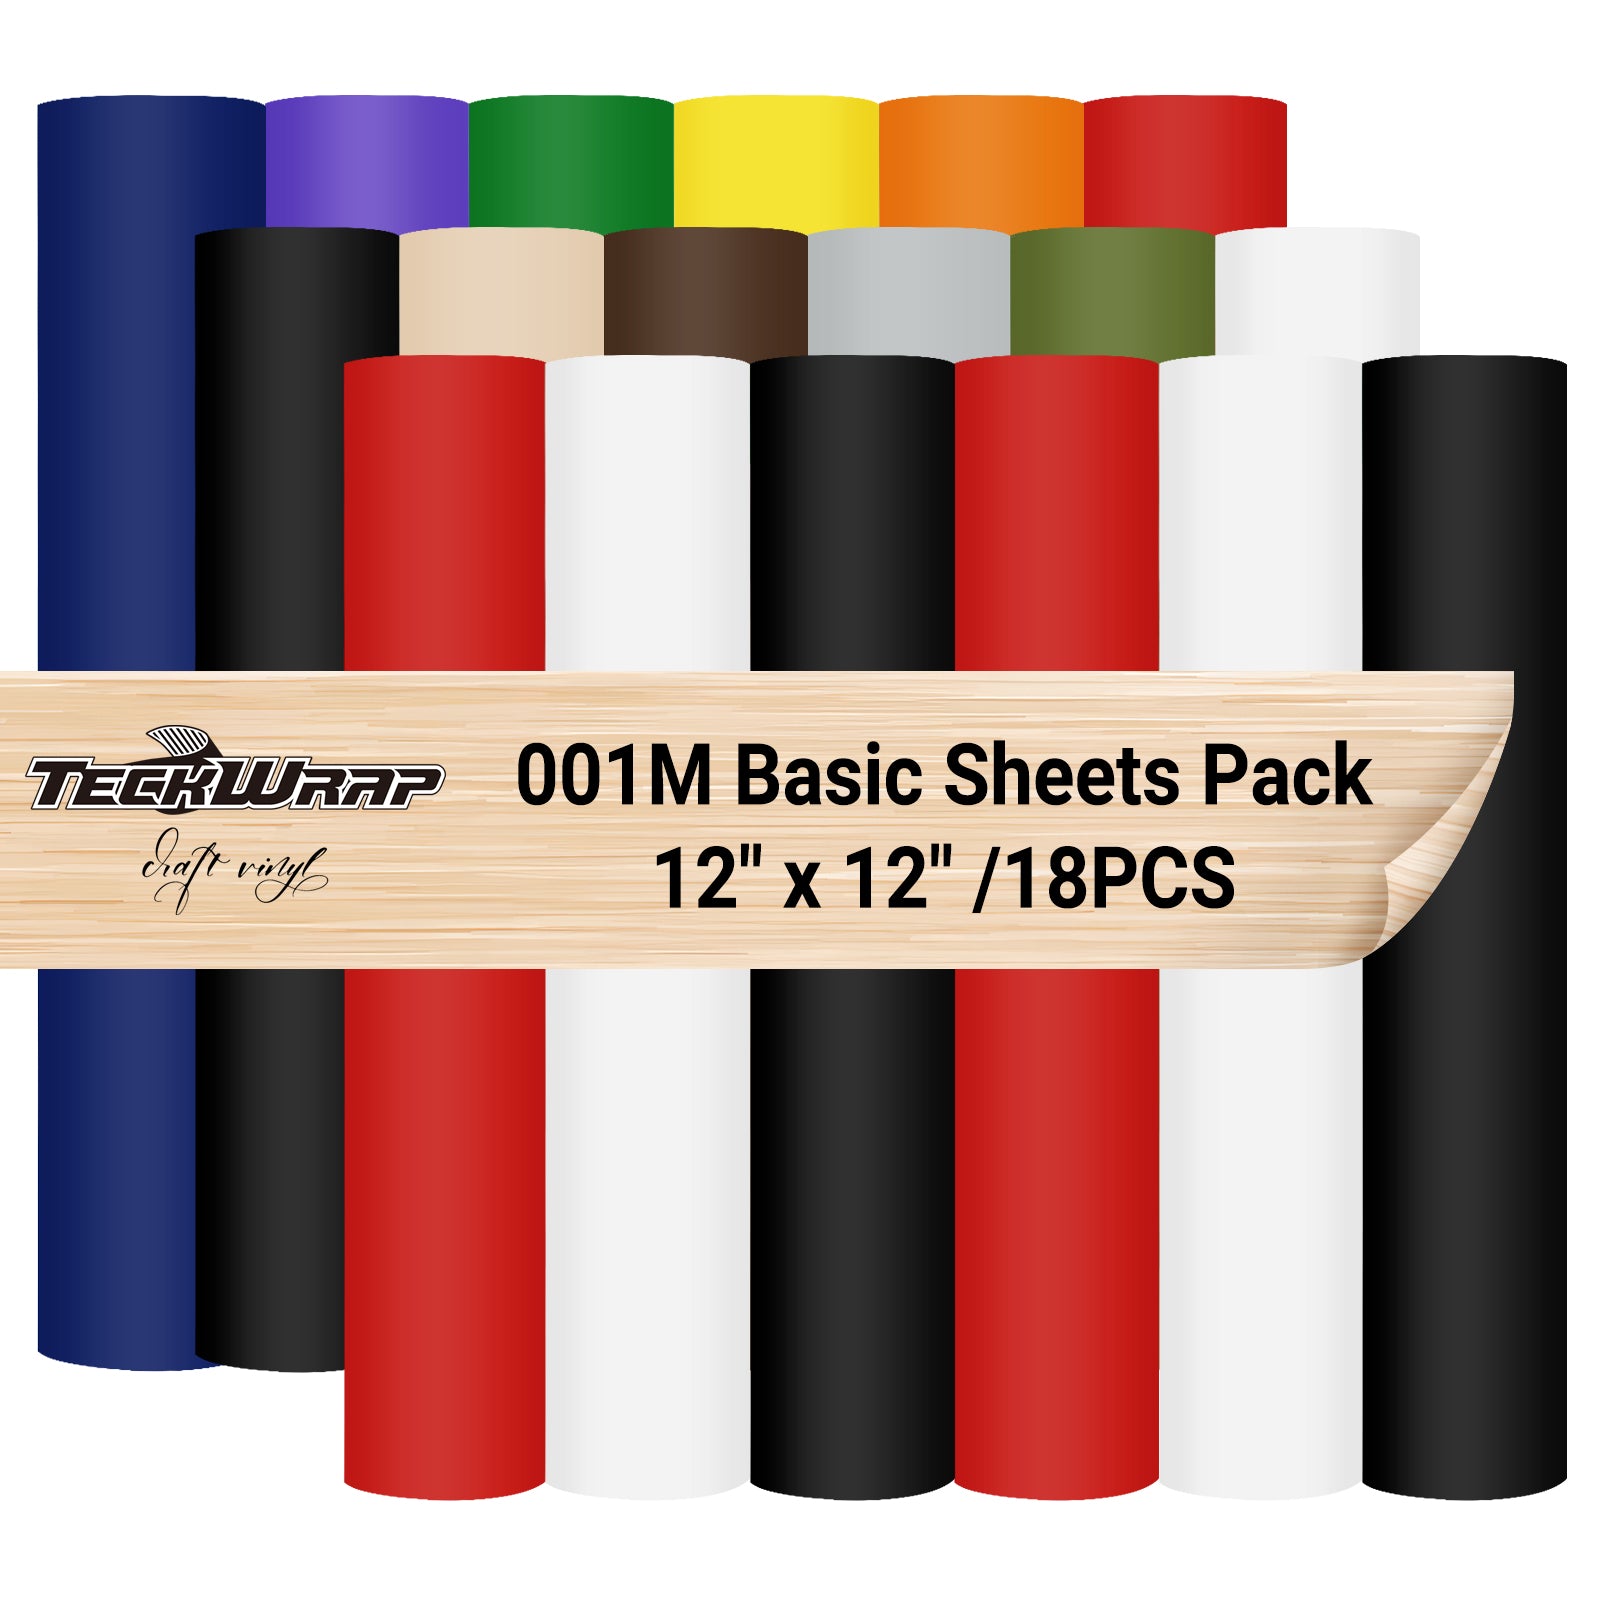 001M Series Basic Color Sheets Pack